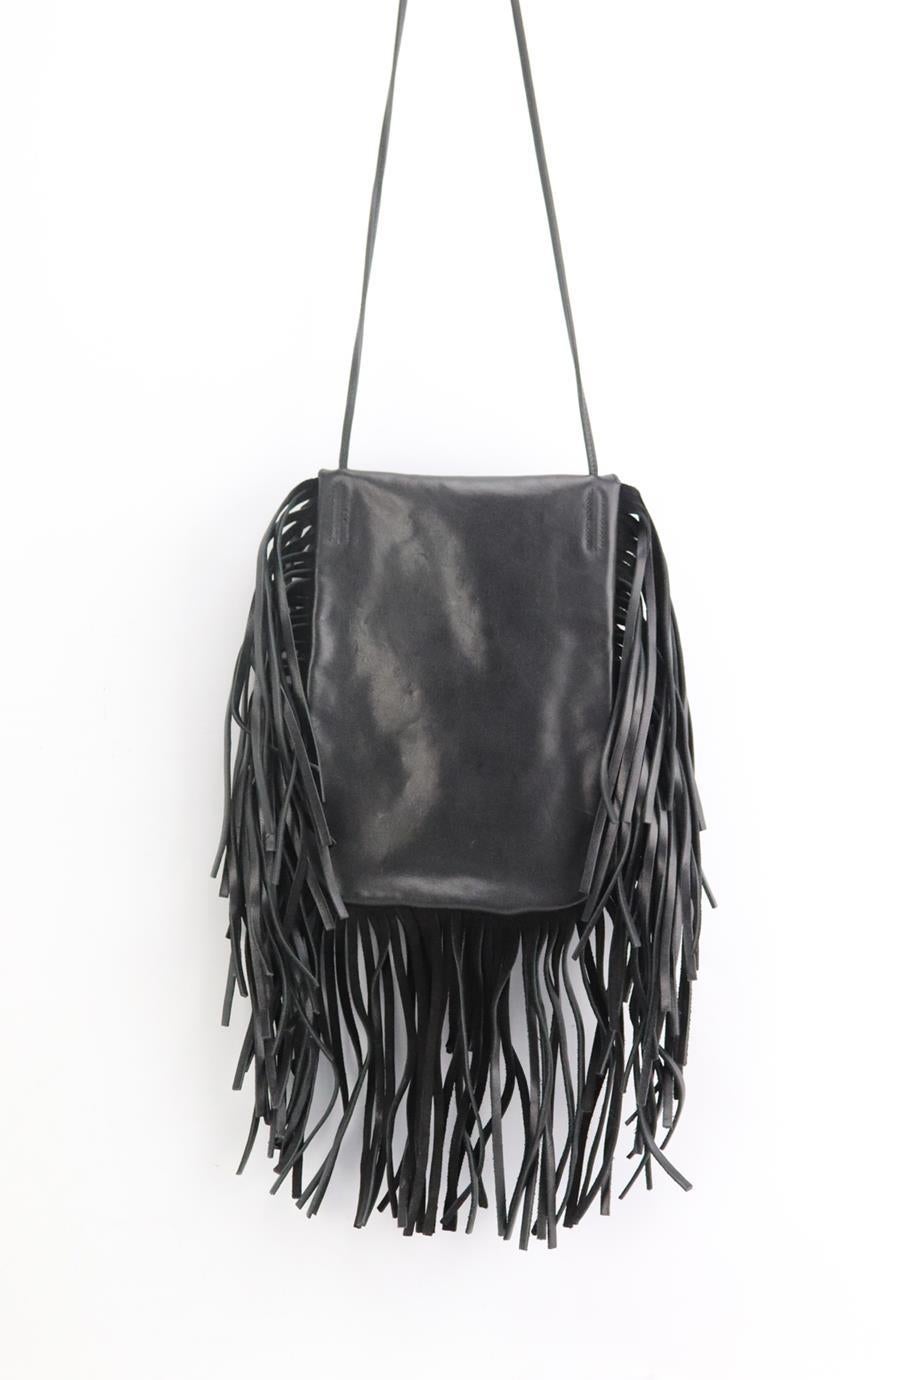 Saint Laurent Anita fringed leather shoulder bag. Made from black leather with silver-tone studded detail and leather fringing, it has a large interior compartment. Black. Flap fastening at front. Does not come with dustbag or box. Height: 9 in.